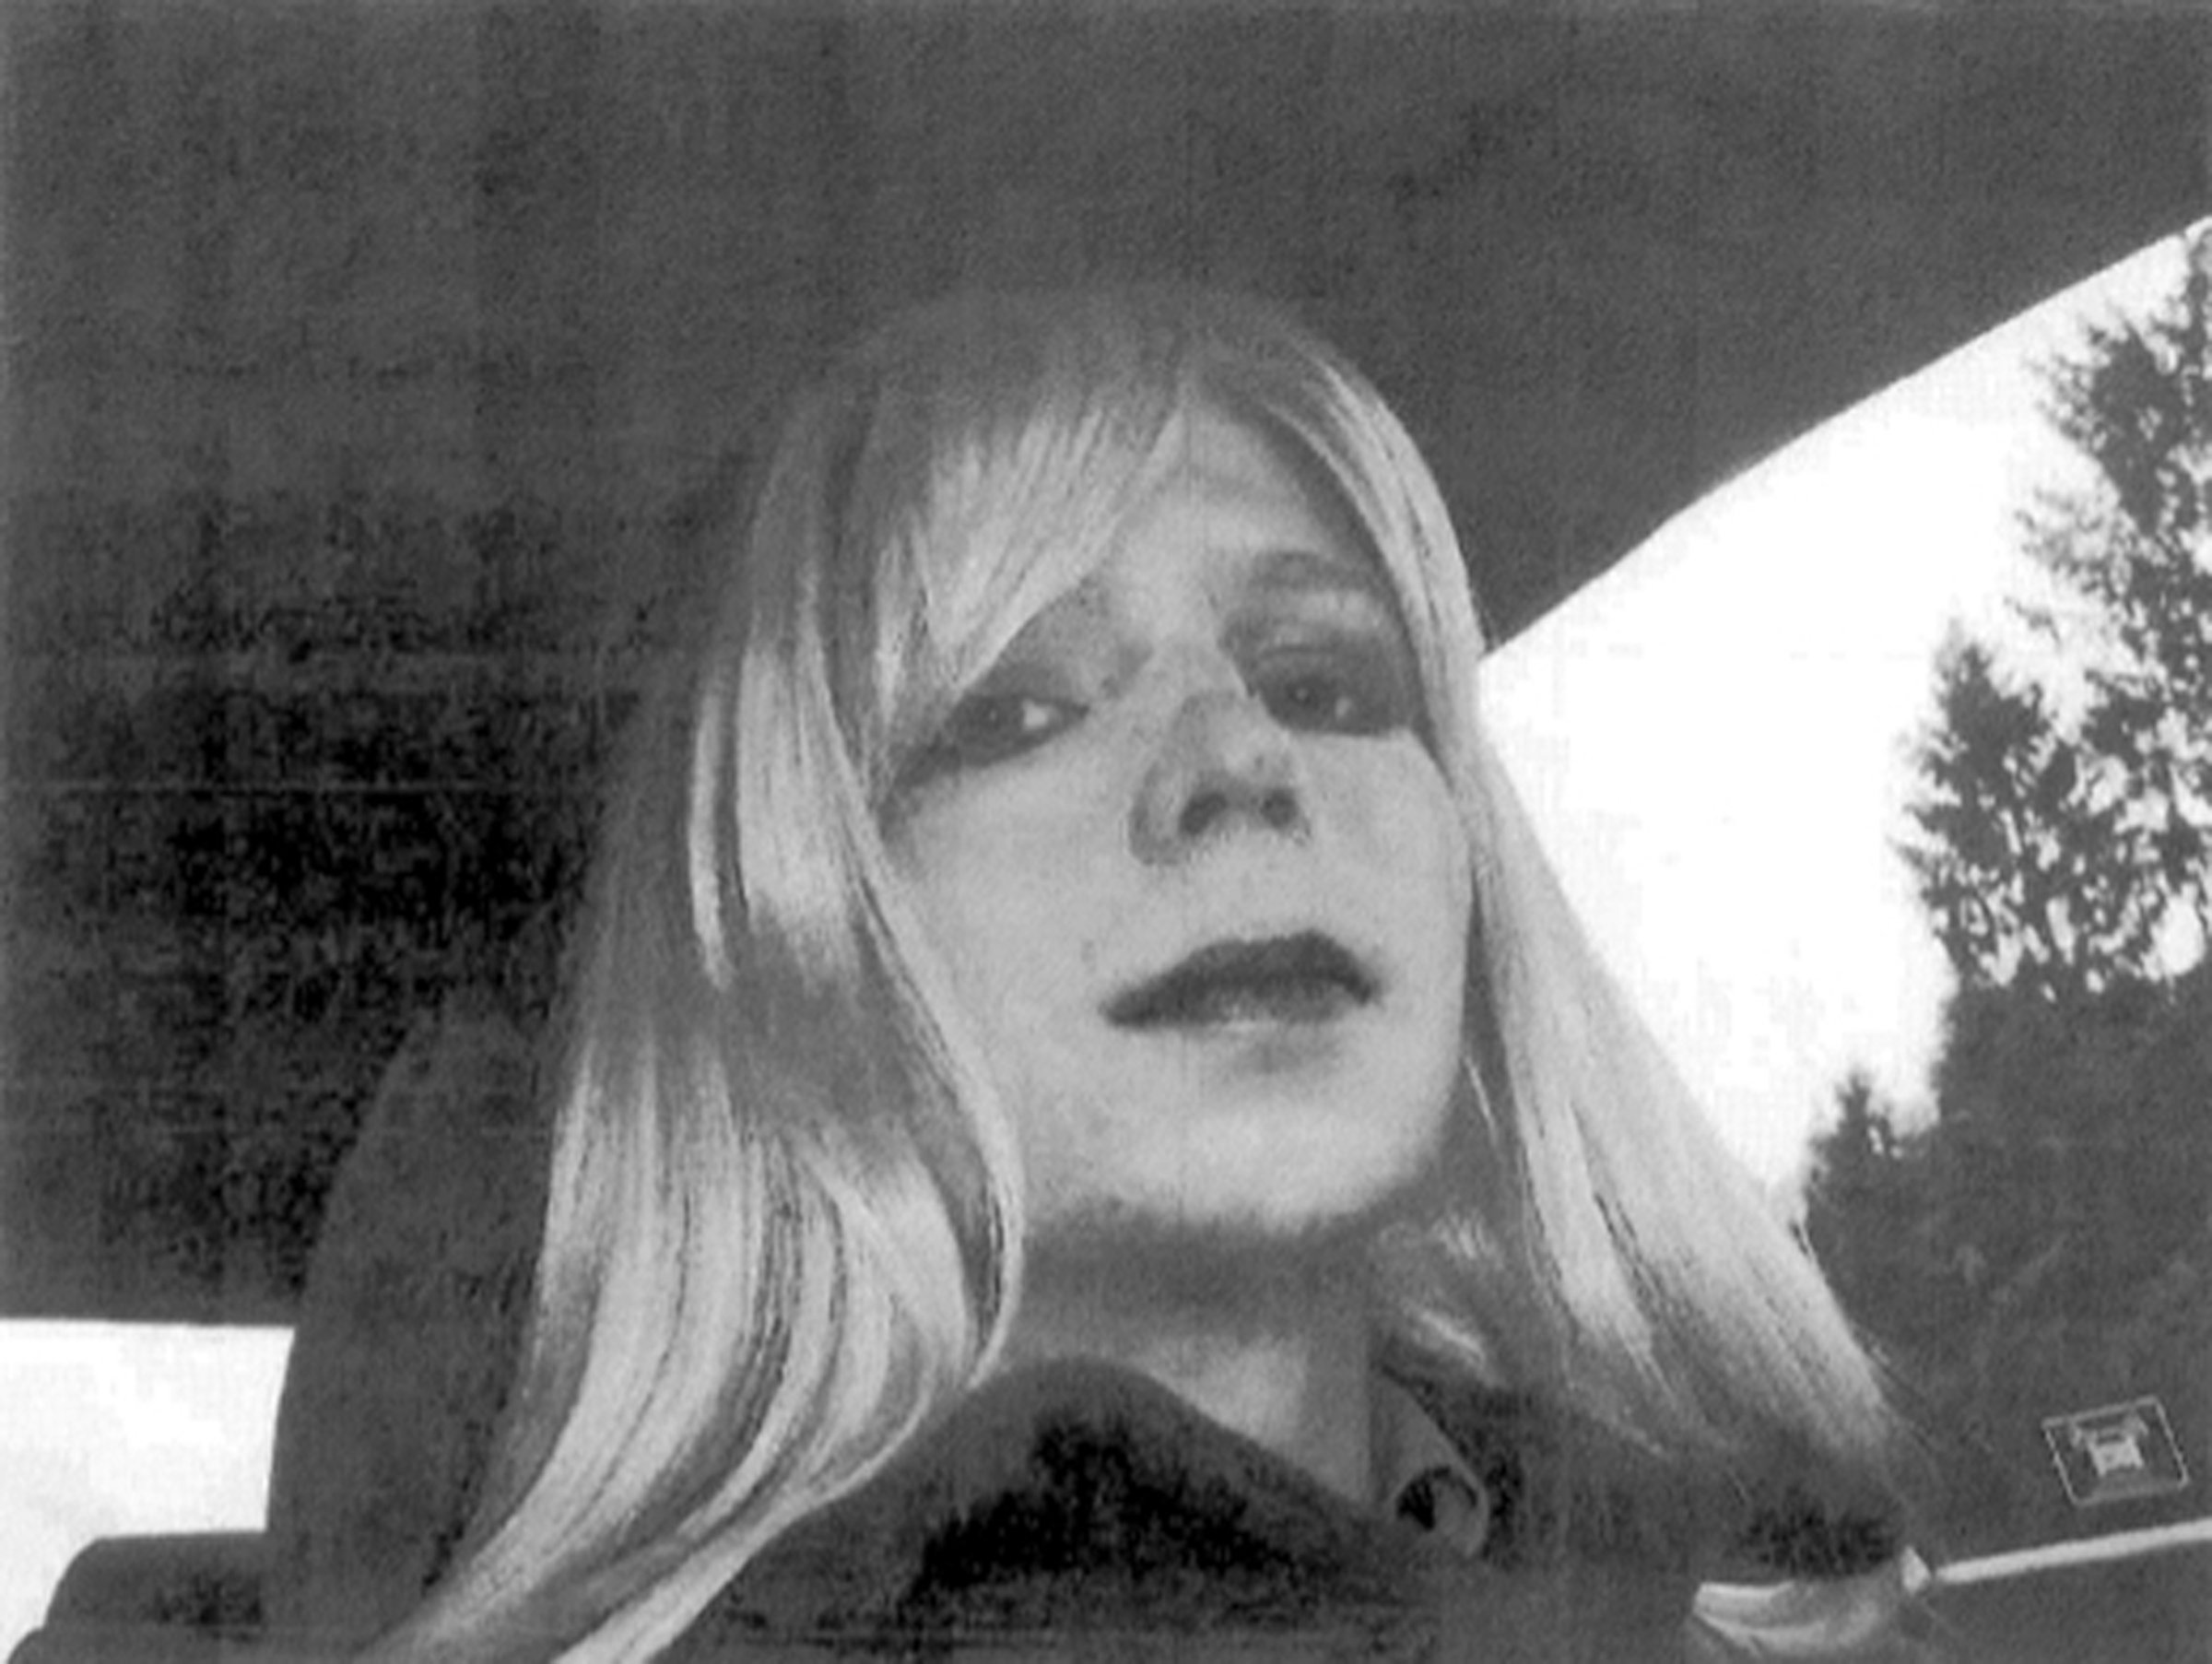 Chelsea Manning poses for a photo wearing a wig and lipstick.